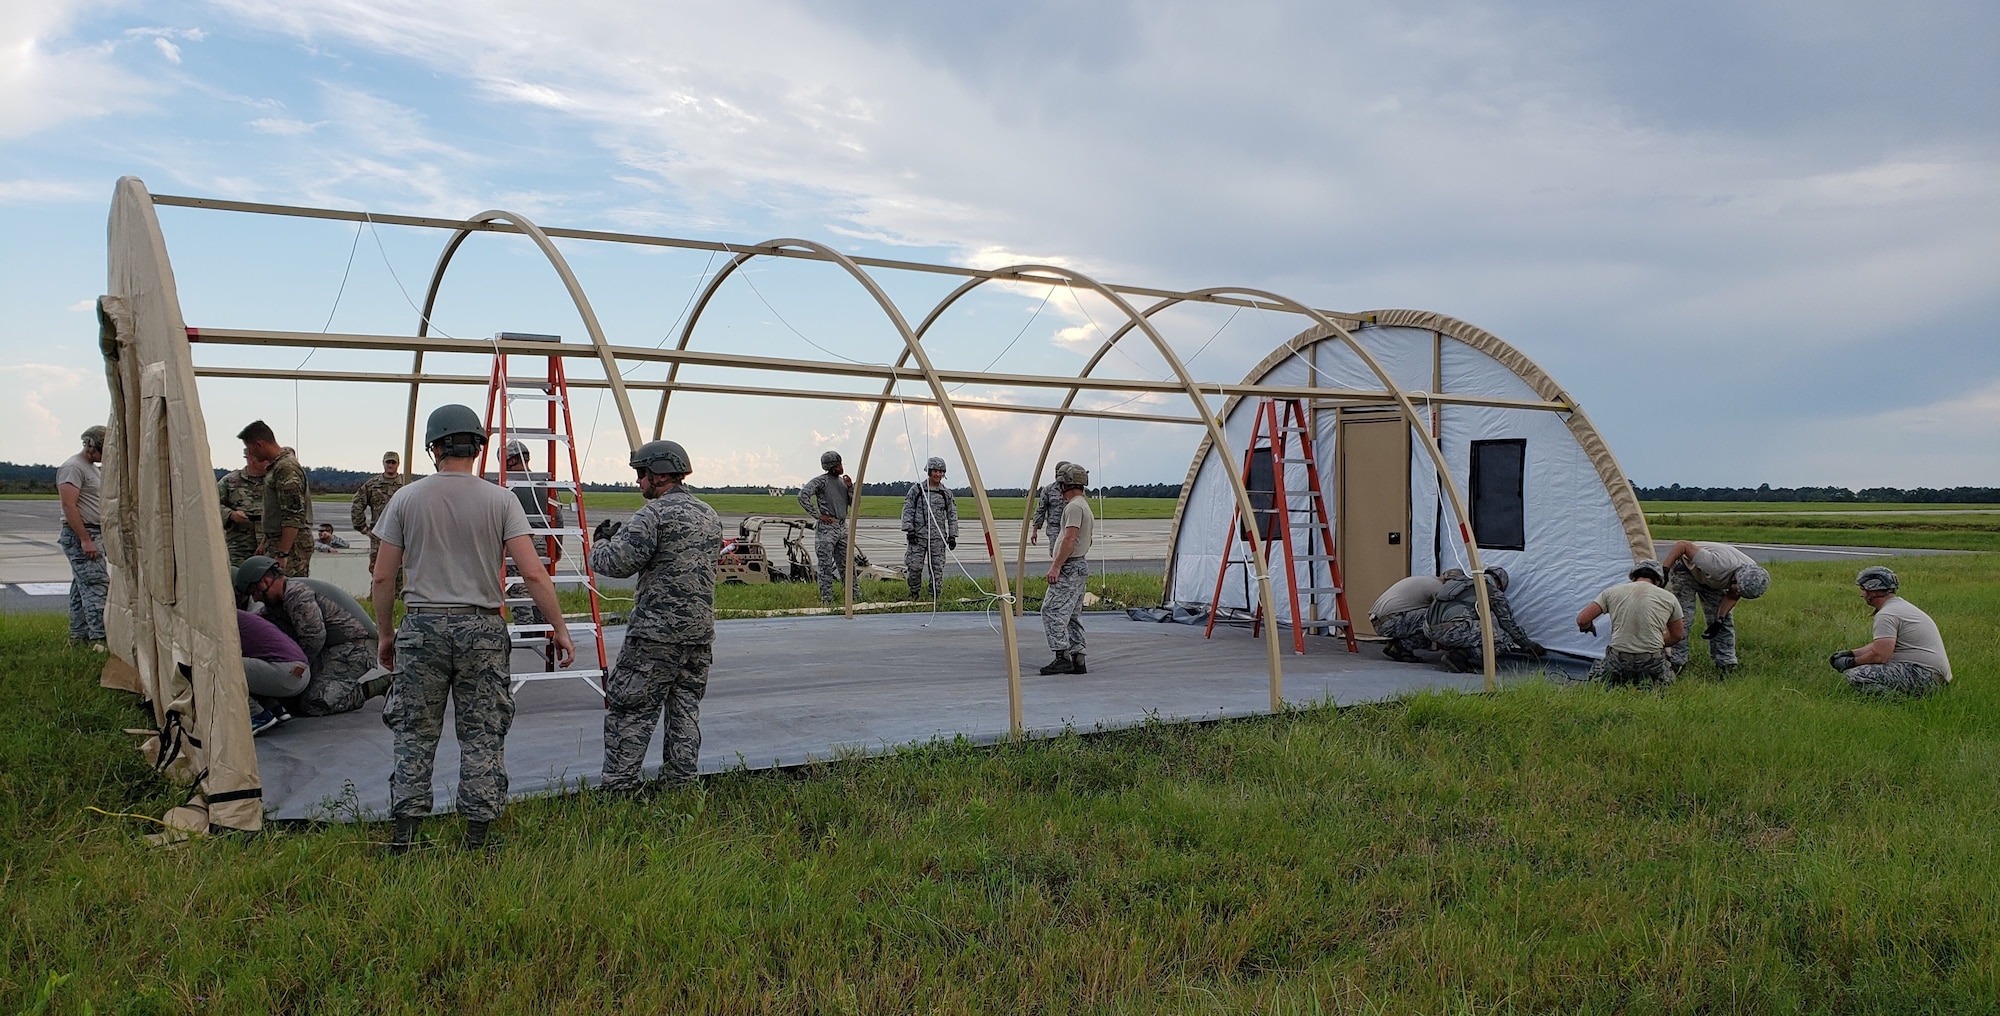 Airmen build a shelter for communications and operations activities 17 September during the Combat Support Wing exercise at Moody AFB, Georgia.